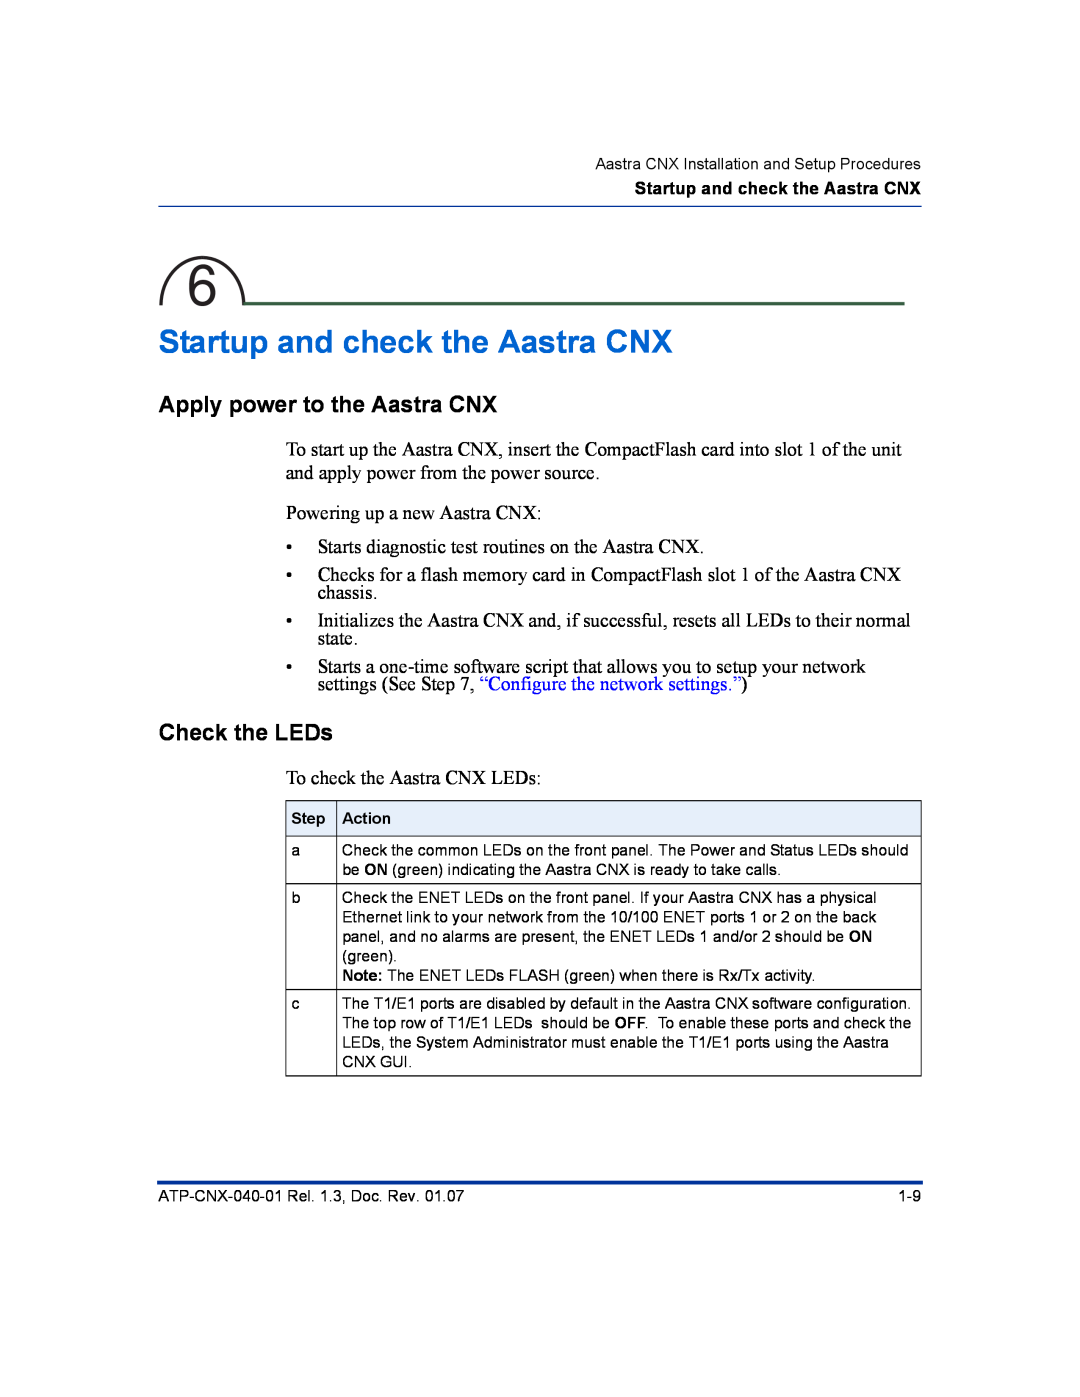 Aastra Telecom ATP-CNX-040-01 manual Startup and check the Aastra CNX, Apply power to the Aastra CNX, Check the LEDs 